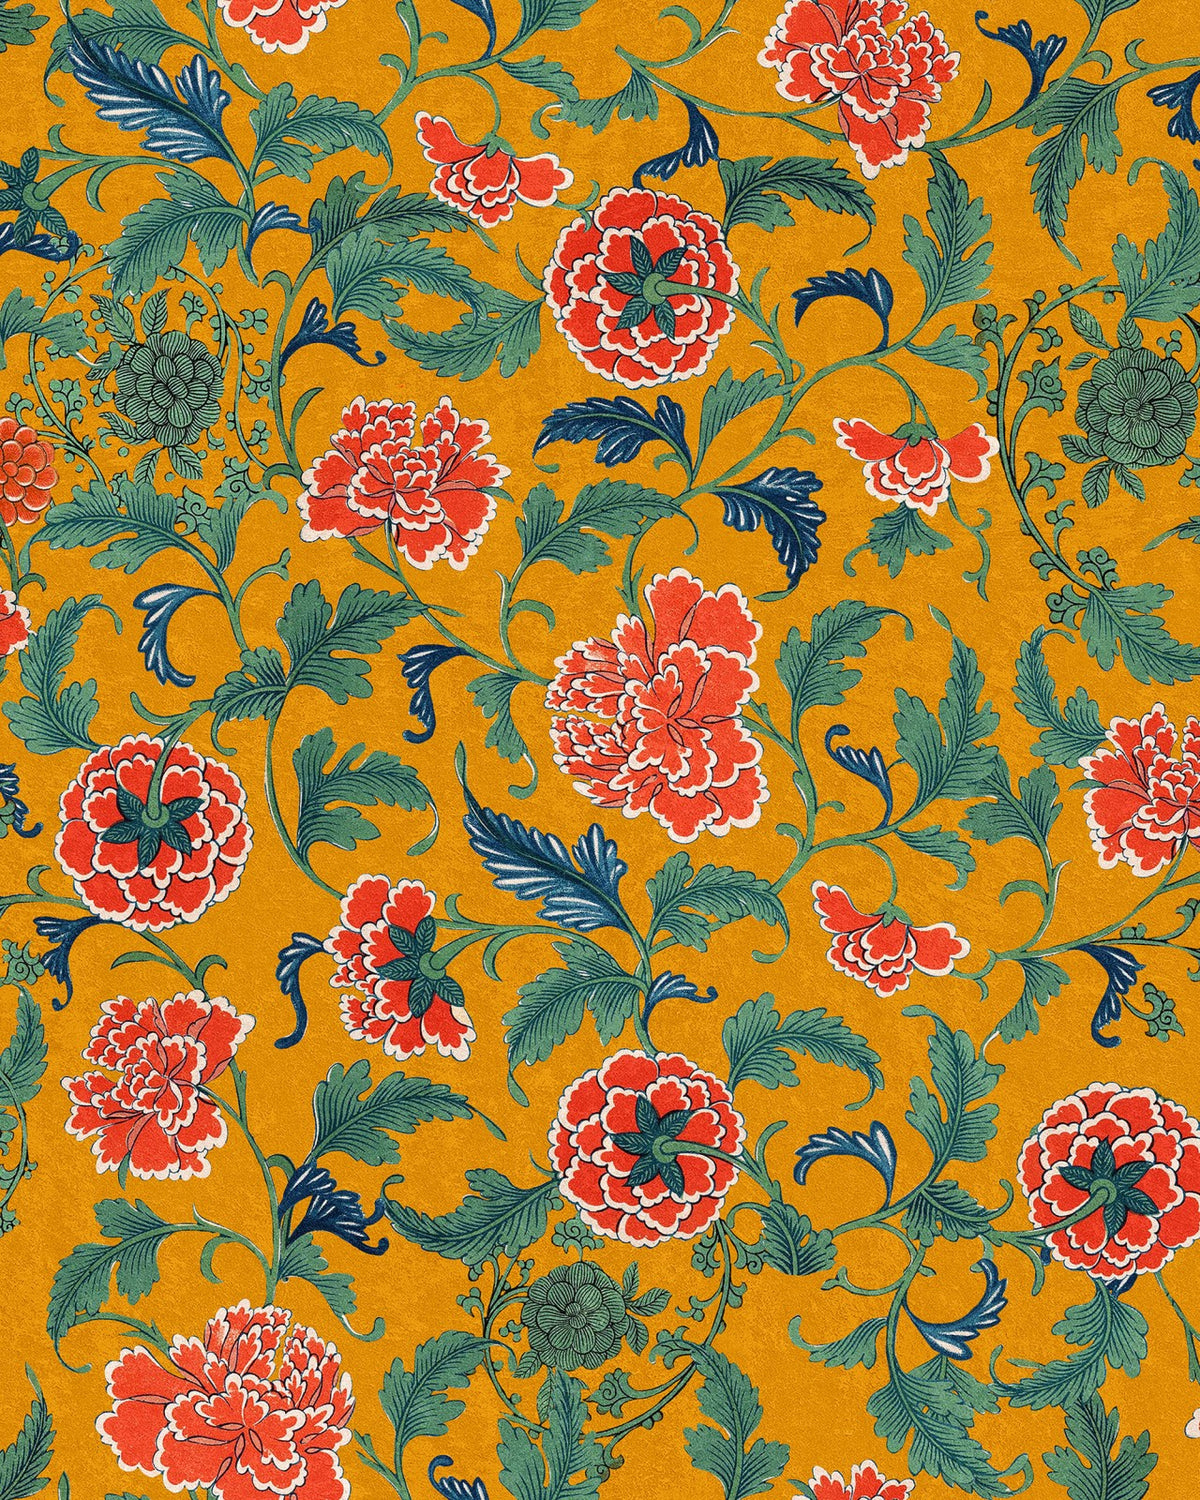 CHINESE ORNAMENT Wallpaper by Mindthegap